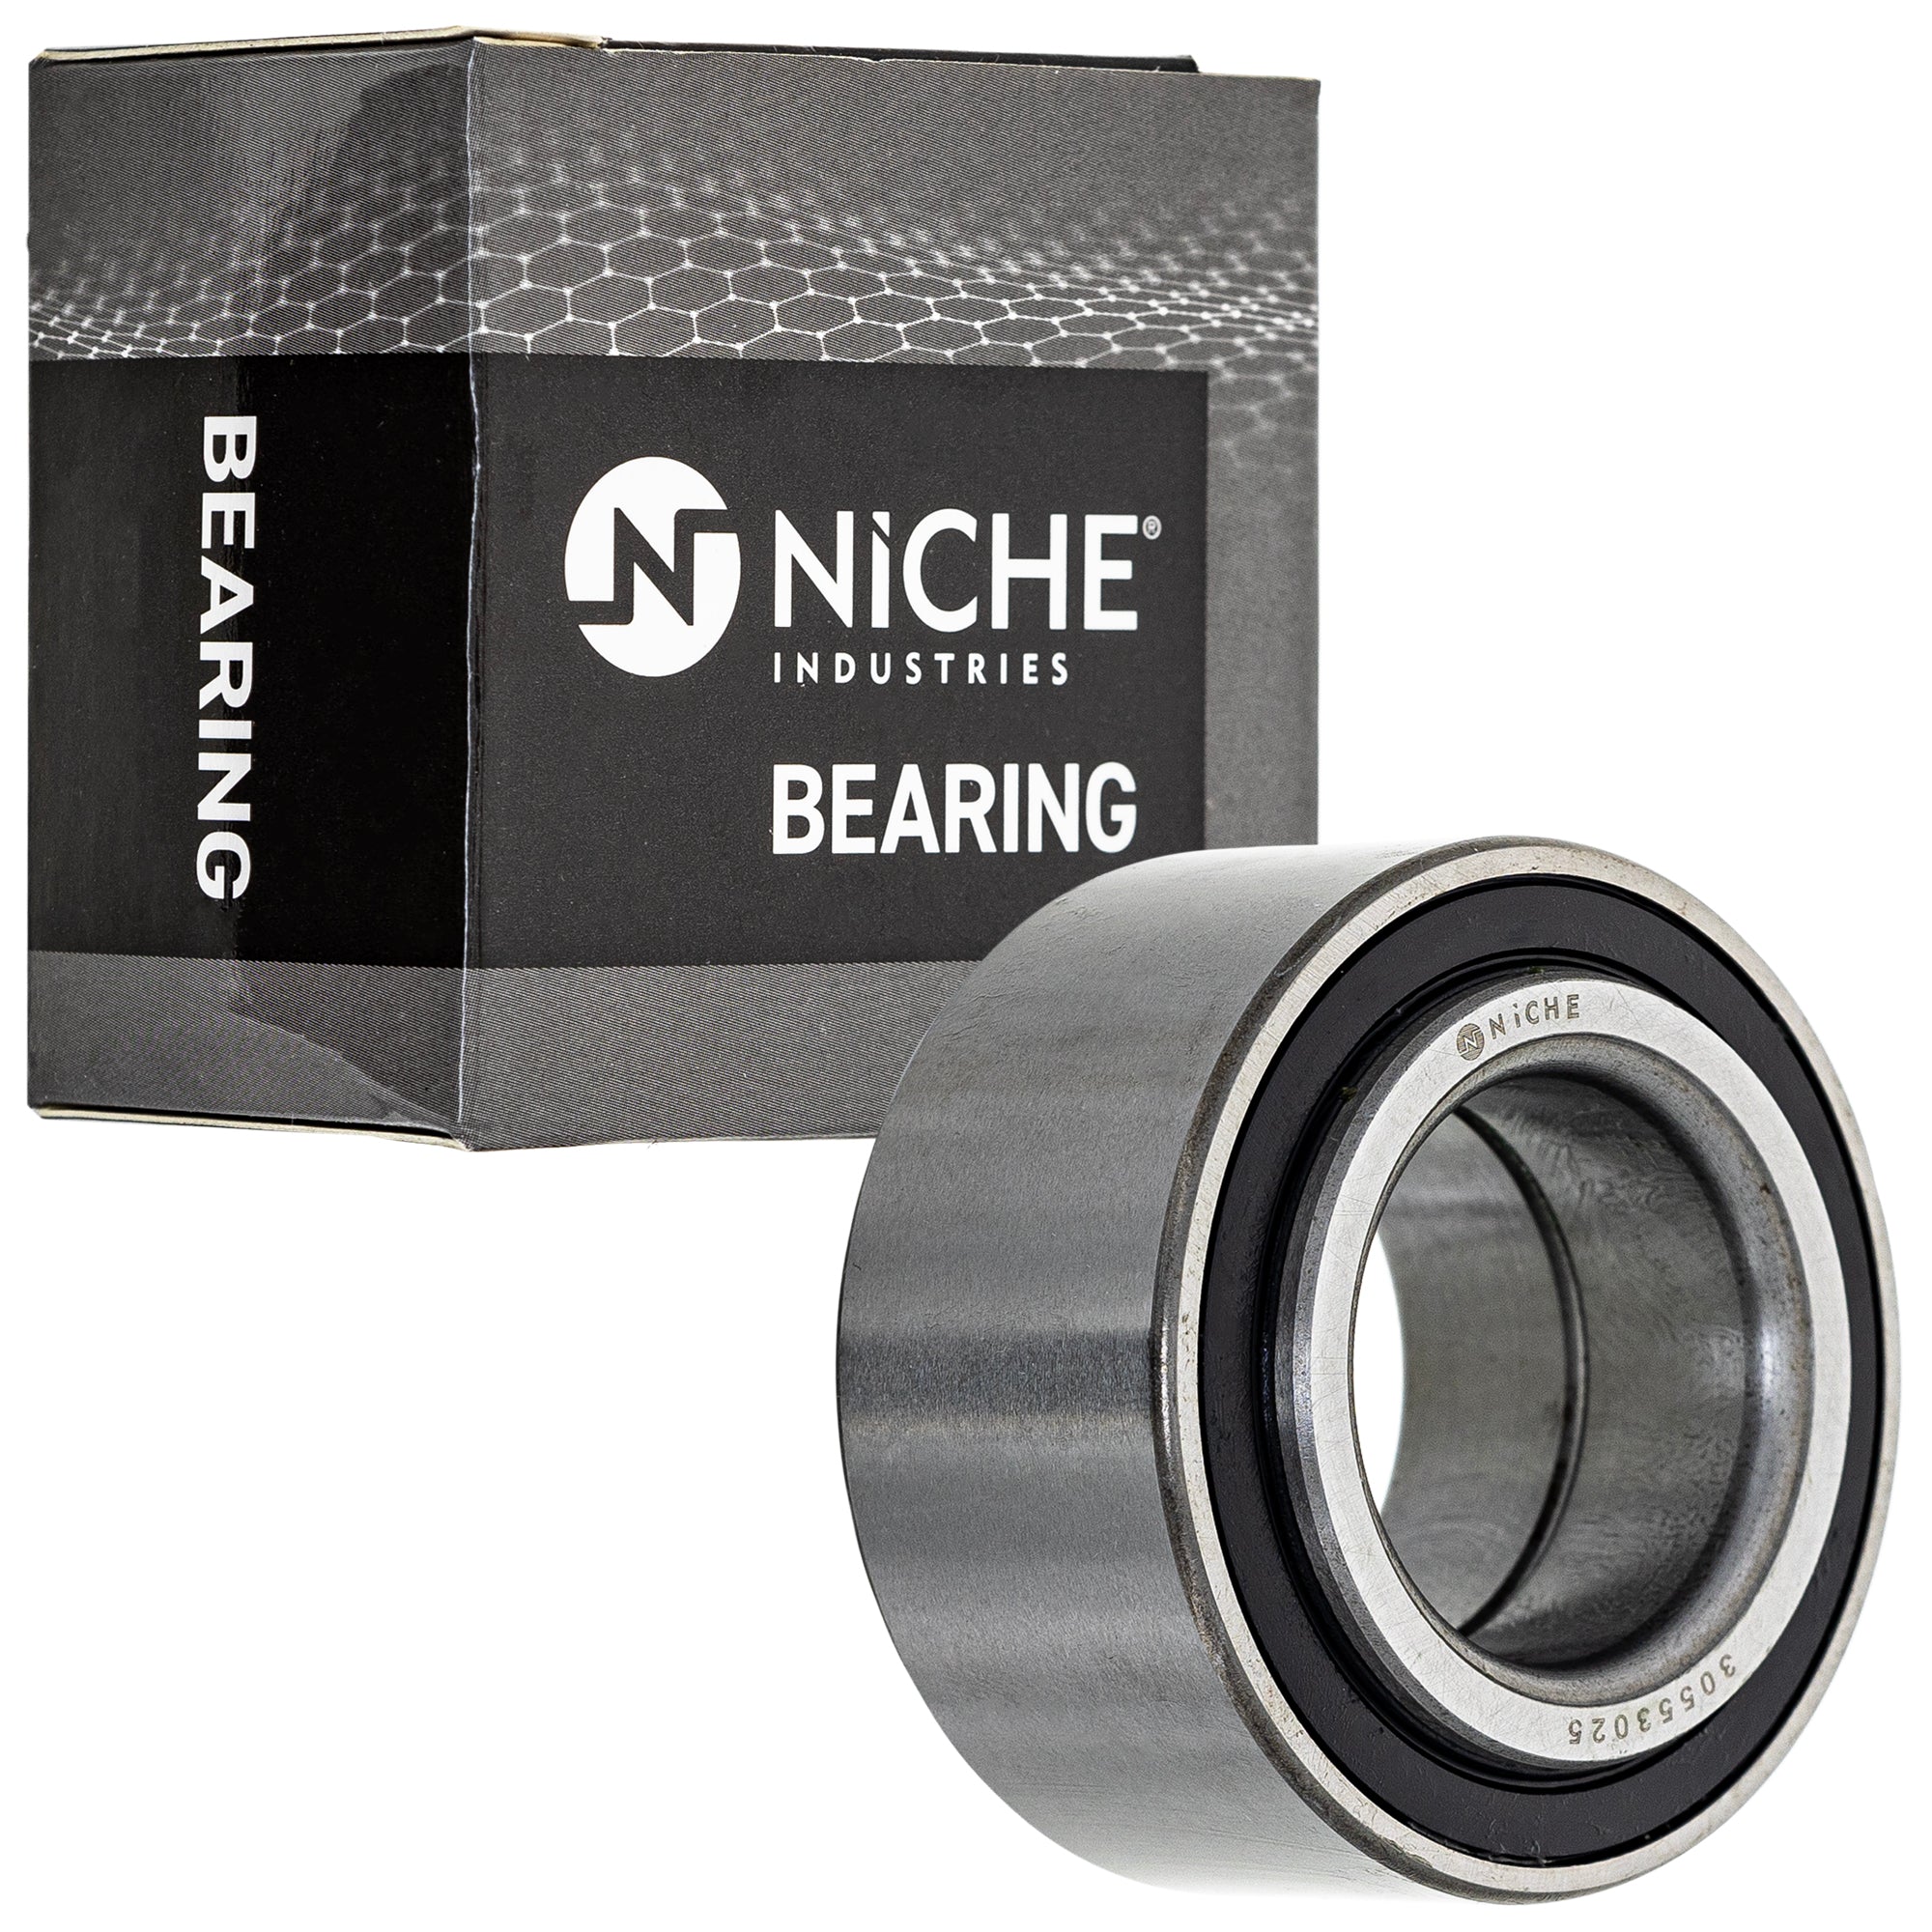 NICHE 519-CBB2263R Bearing 10-Pack for zOTHER Cat